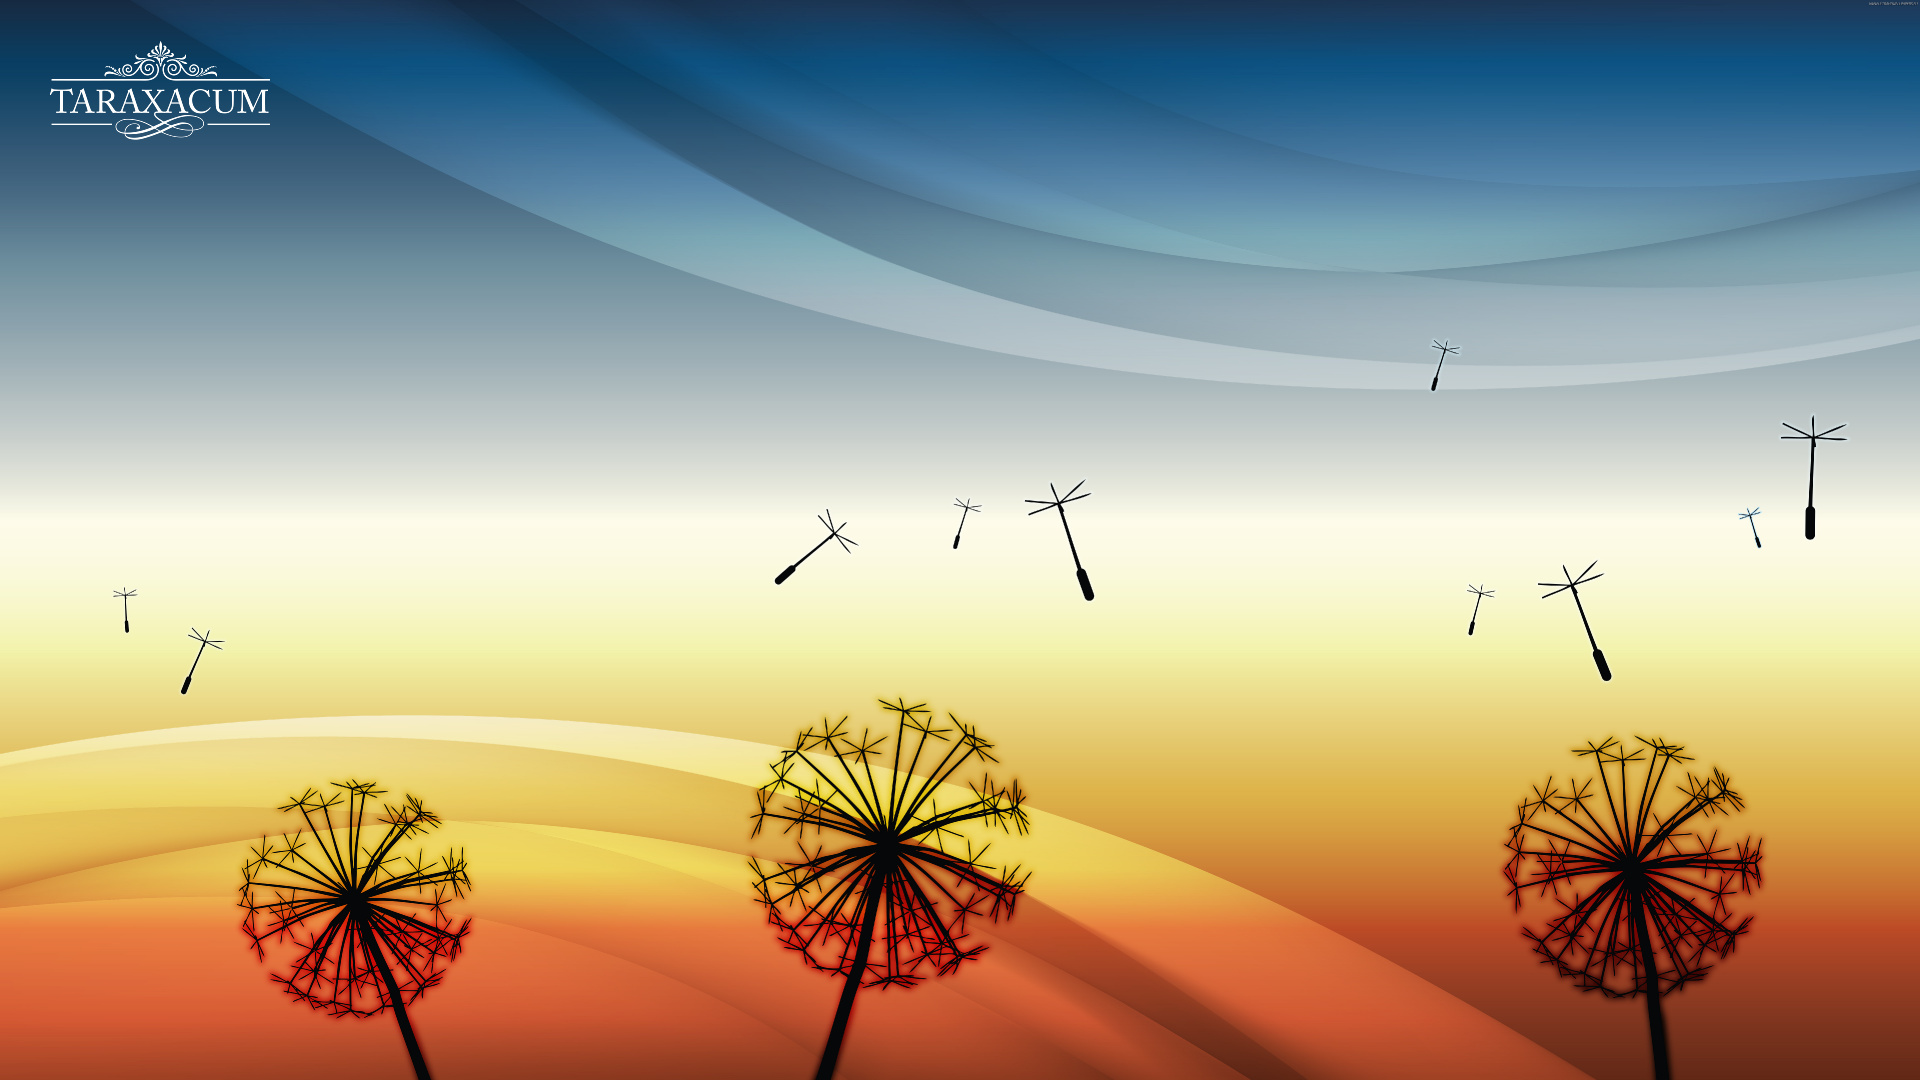 Silhouette of Birds Flying Over The Sky During Sunset. Wallpaper in 1920x1080 Resolution